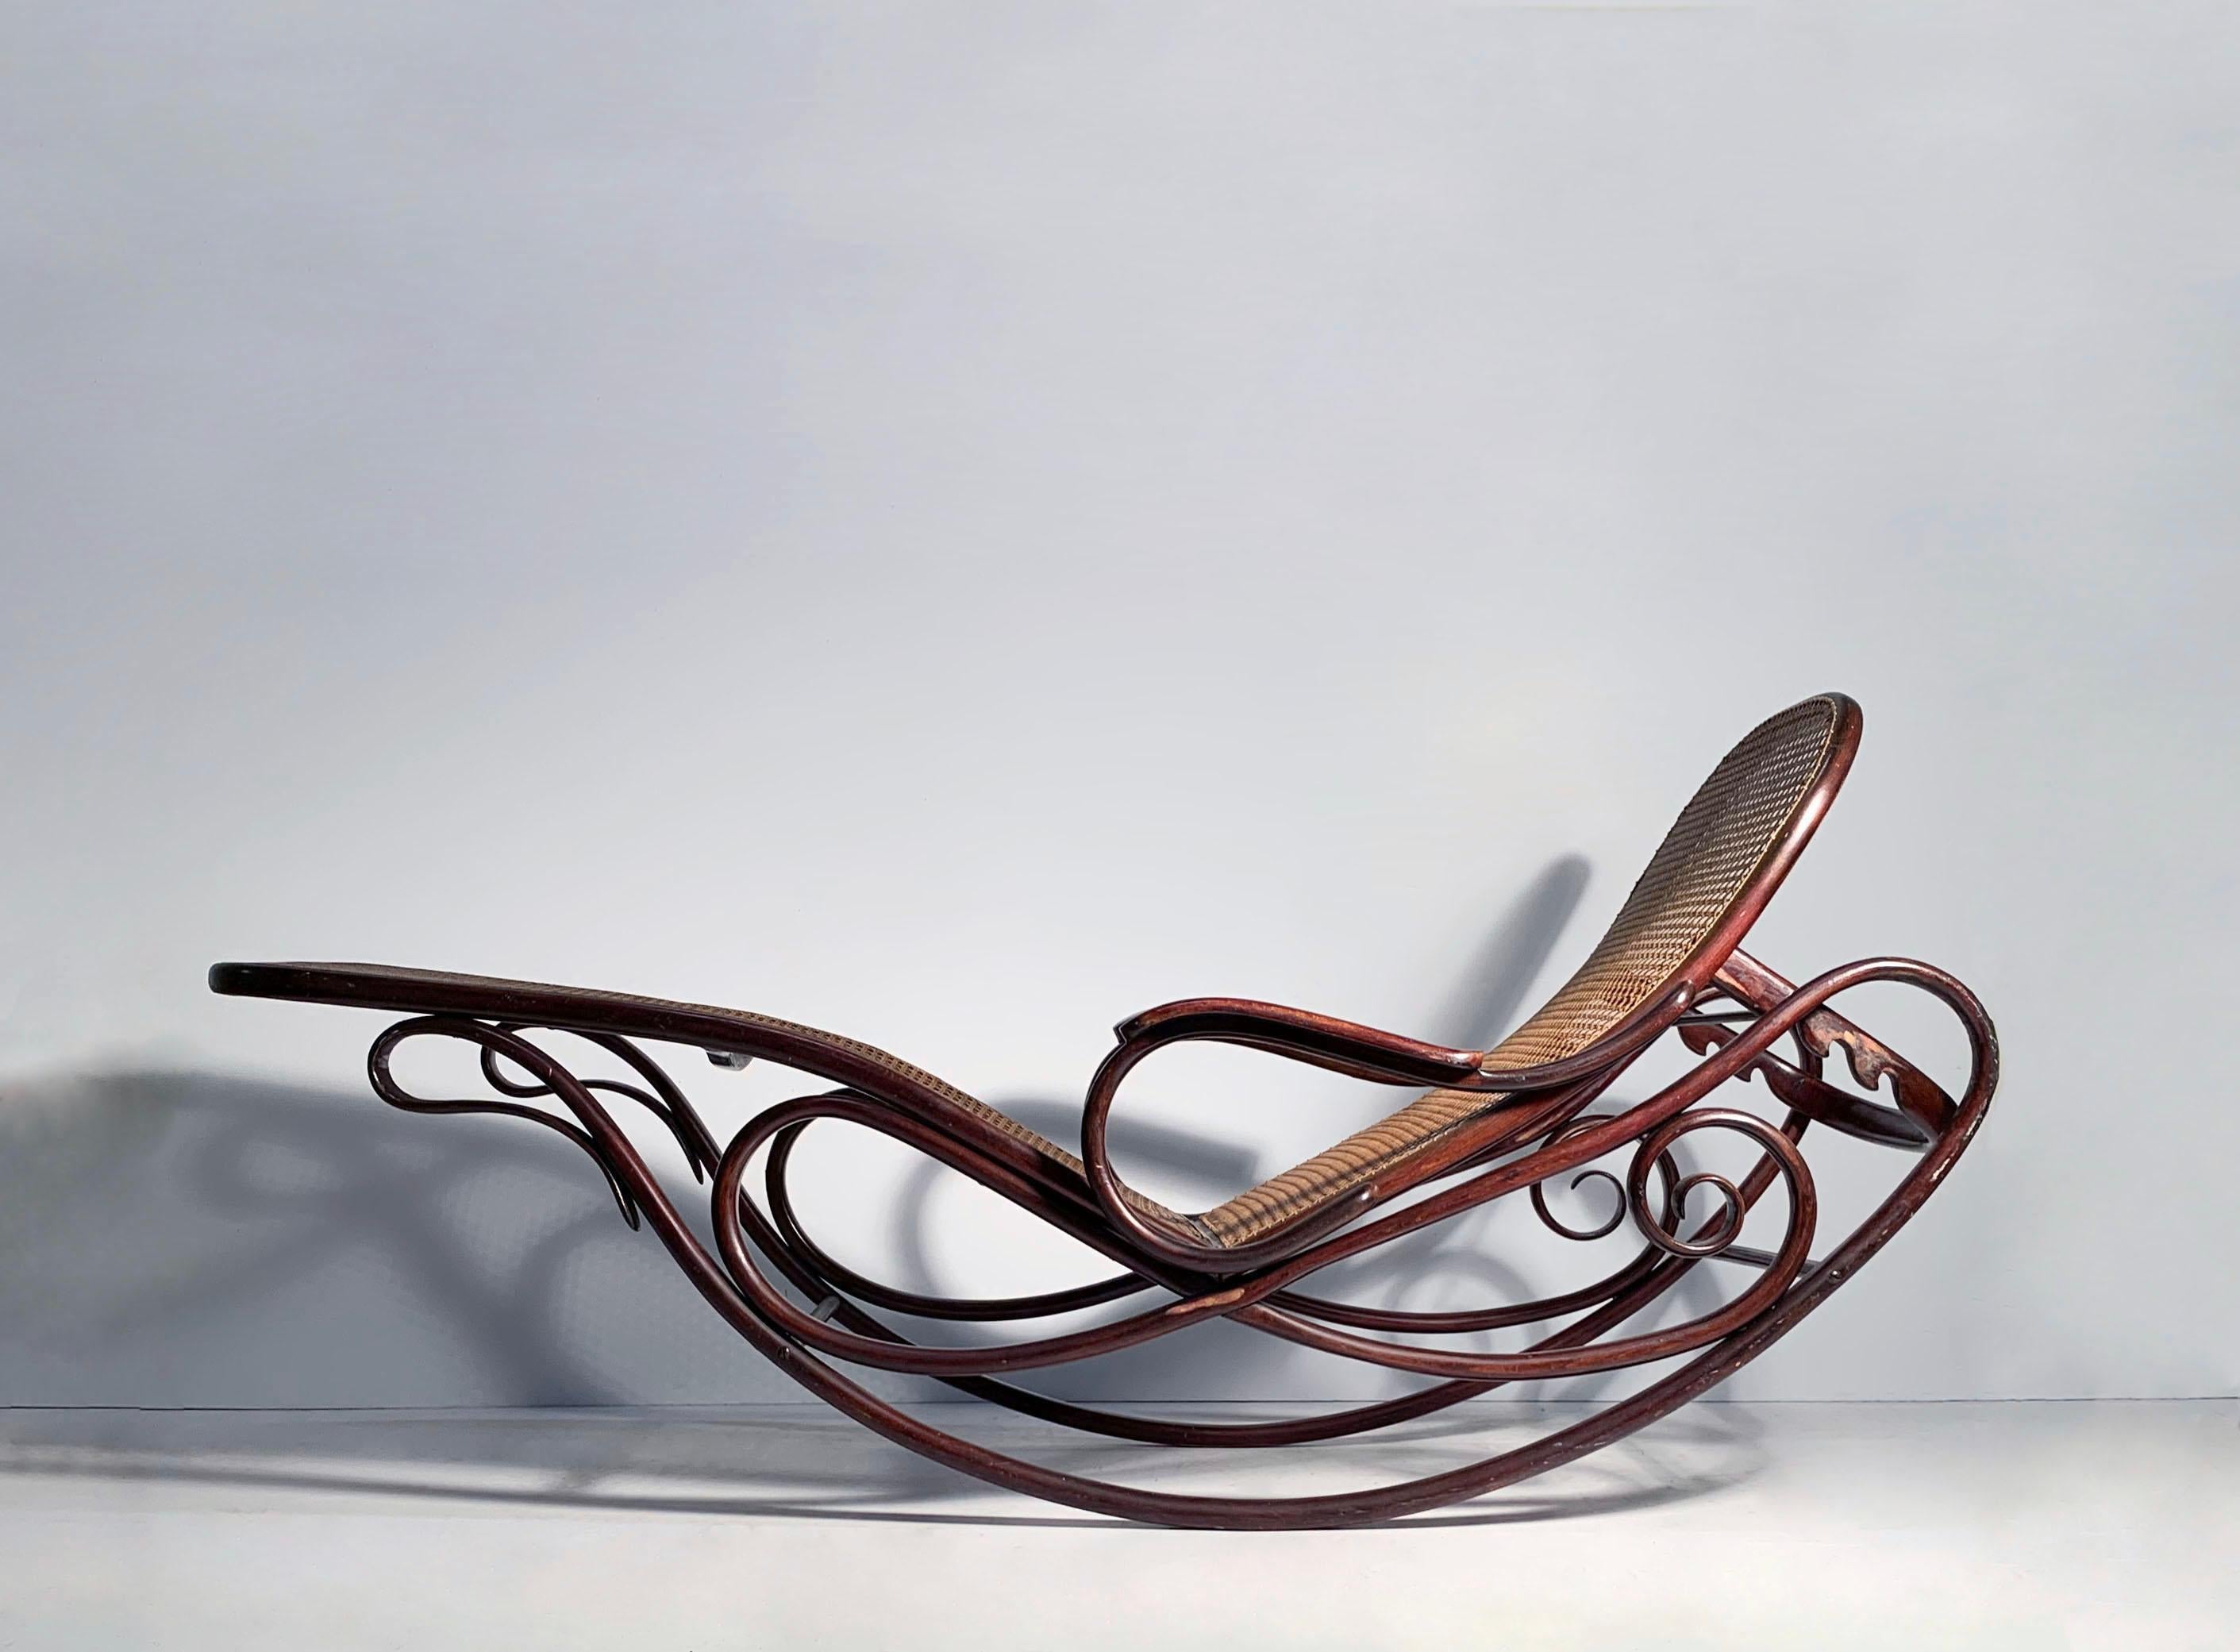 Gebruder Thonet bentwood rocking chaise lounge chair
Scarcely seen model no. 7500. Designed 1880-1883. 

This model appears to be stamped JJ Kohn on underside.
Thonet Merged with Mundus-Kohn in 1922. Difficult to date the exact production time